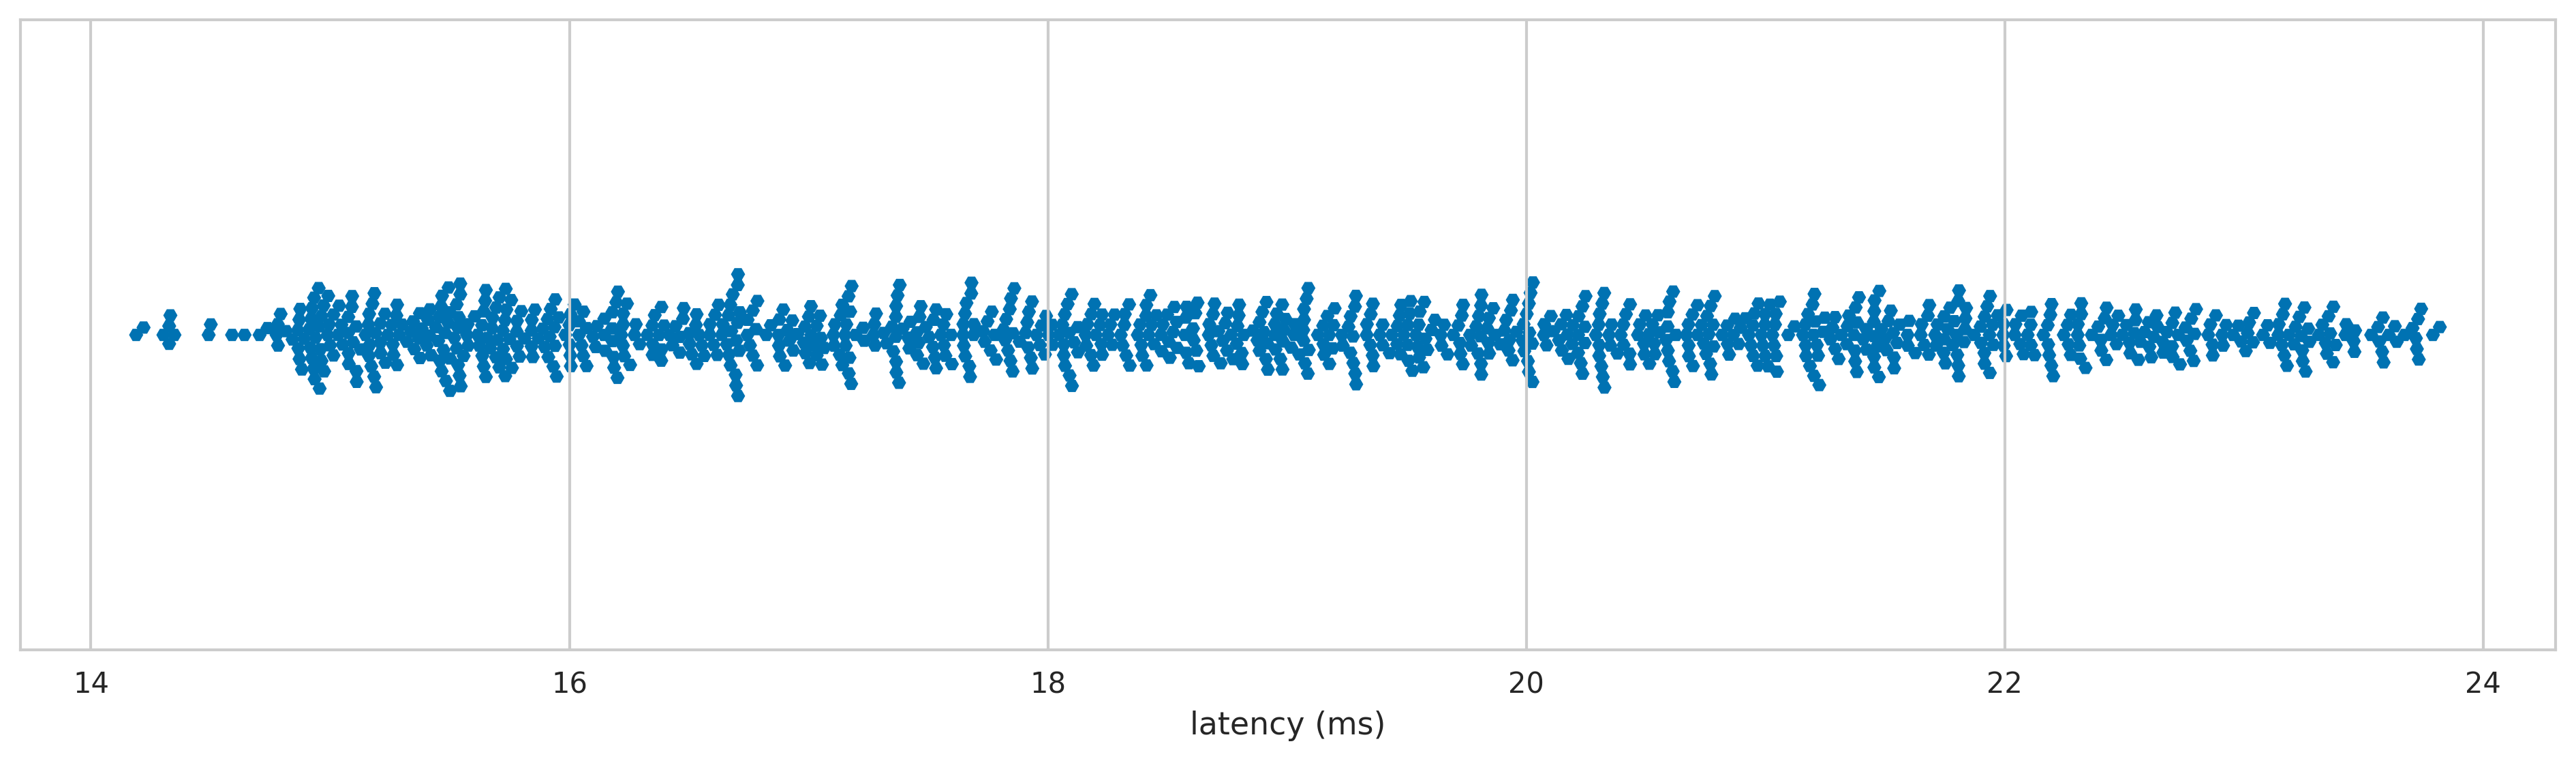 Microsoft Classic Intellimouse (PS_2) latency distribution 